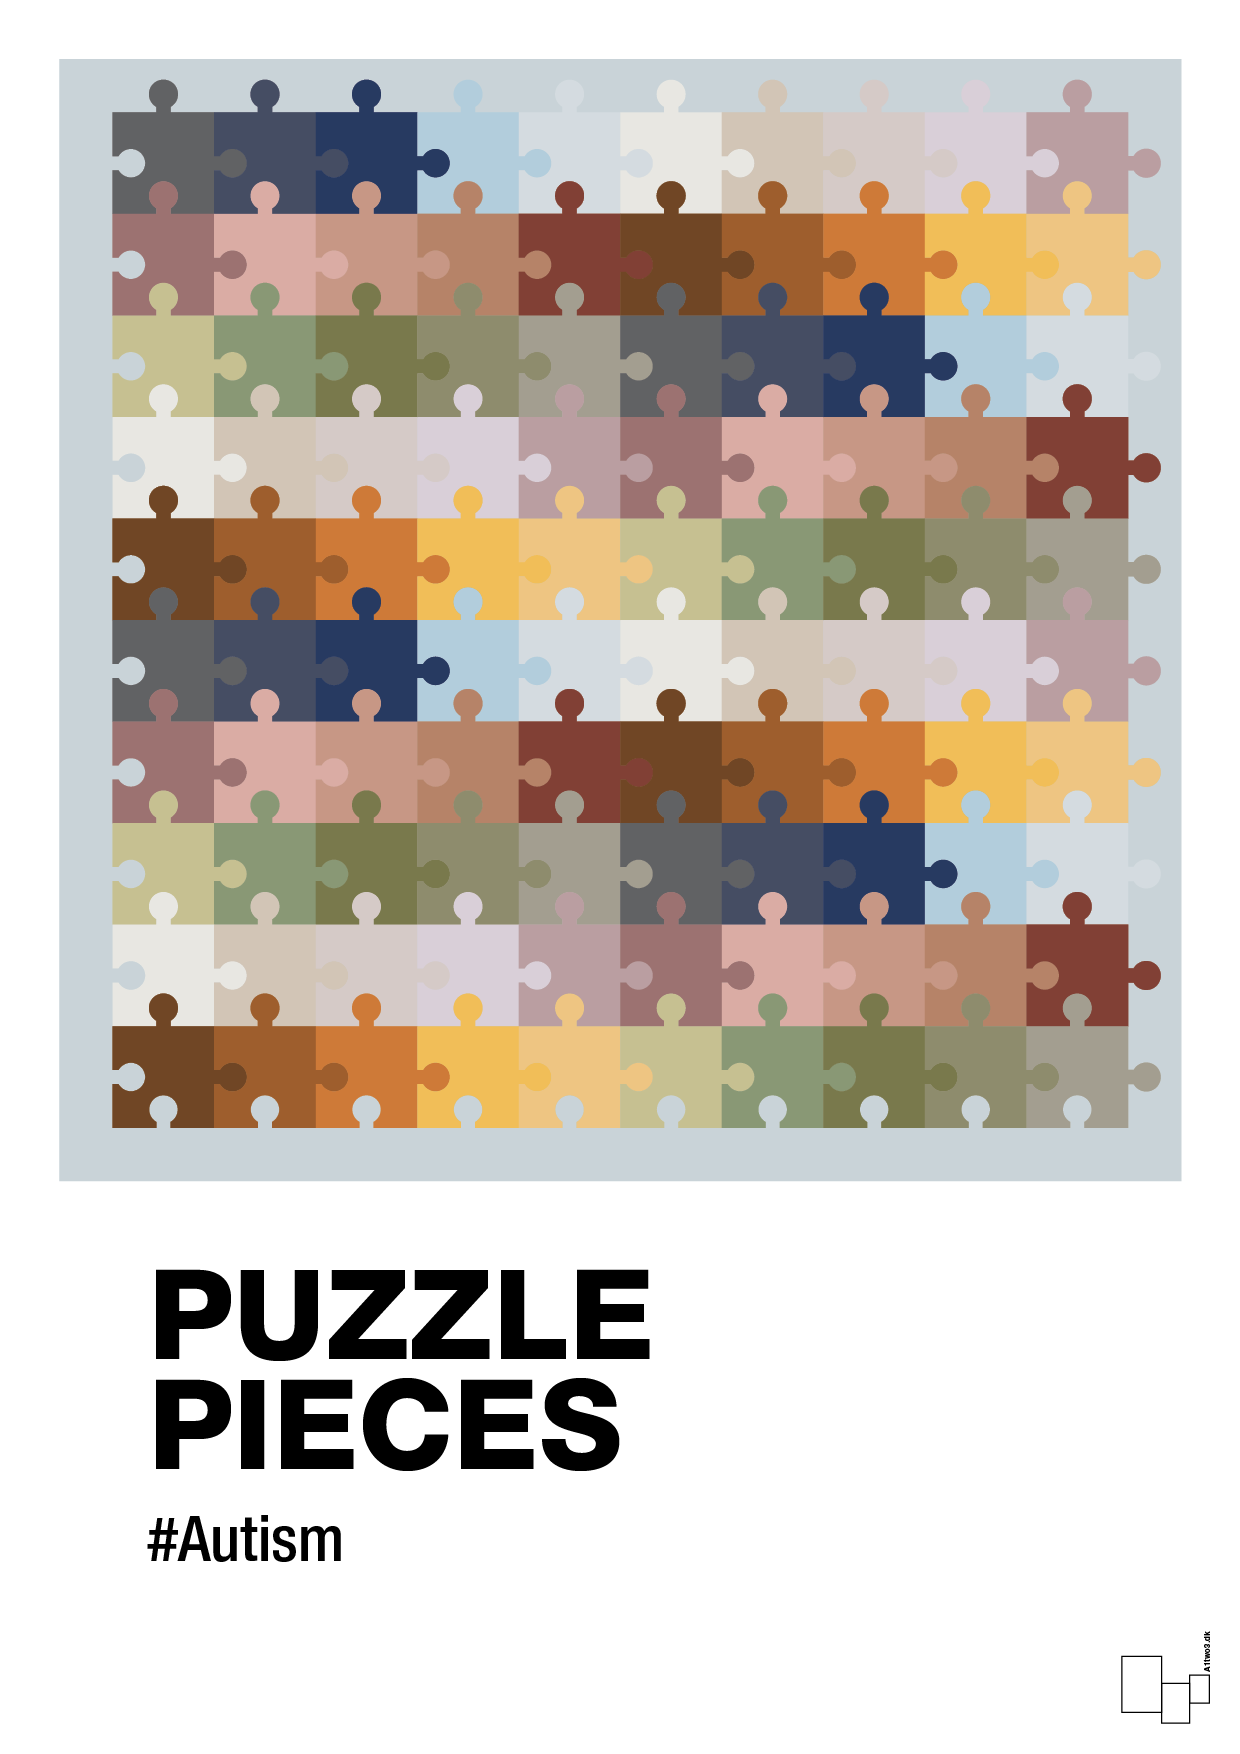 puzzle pieces - Plakat med Samfund i Light Drizzle